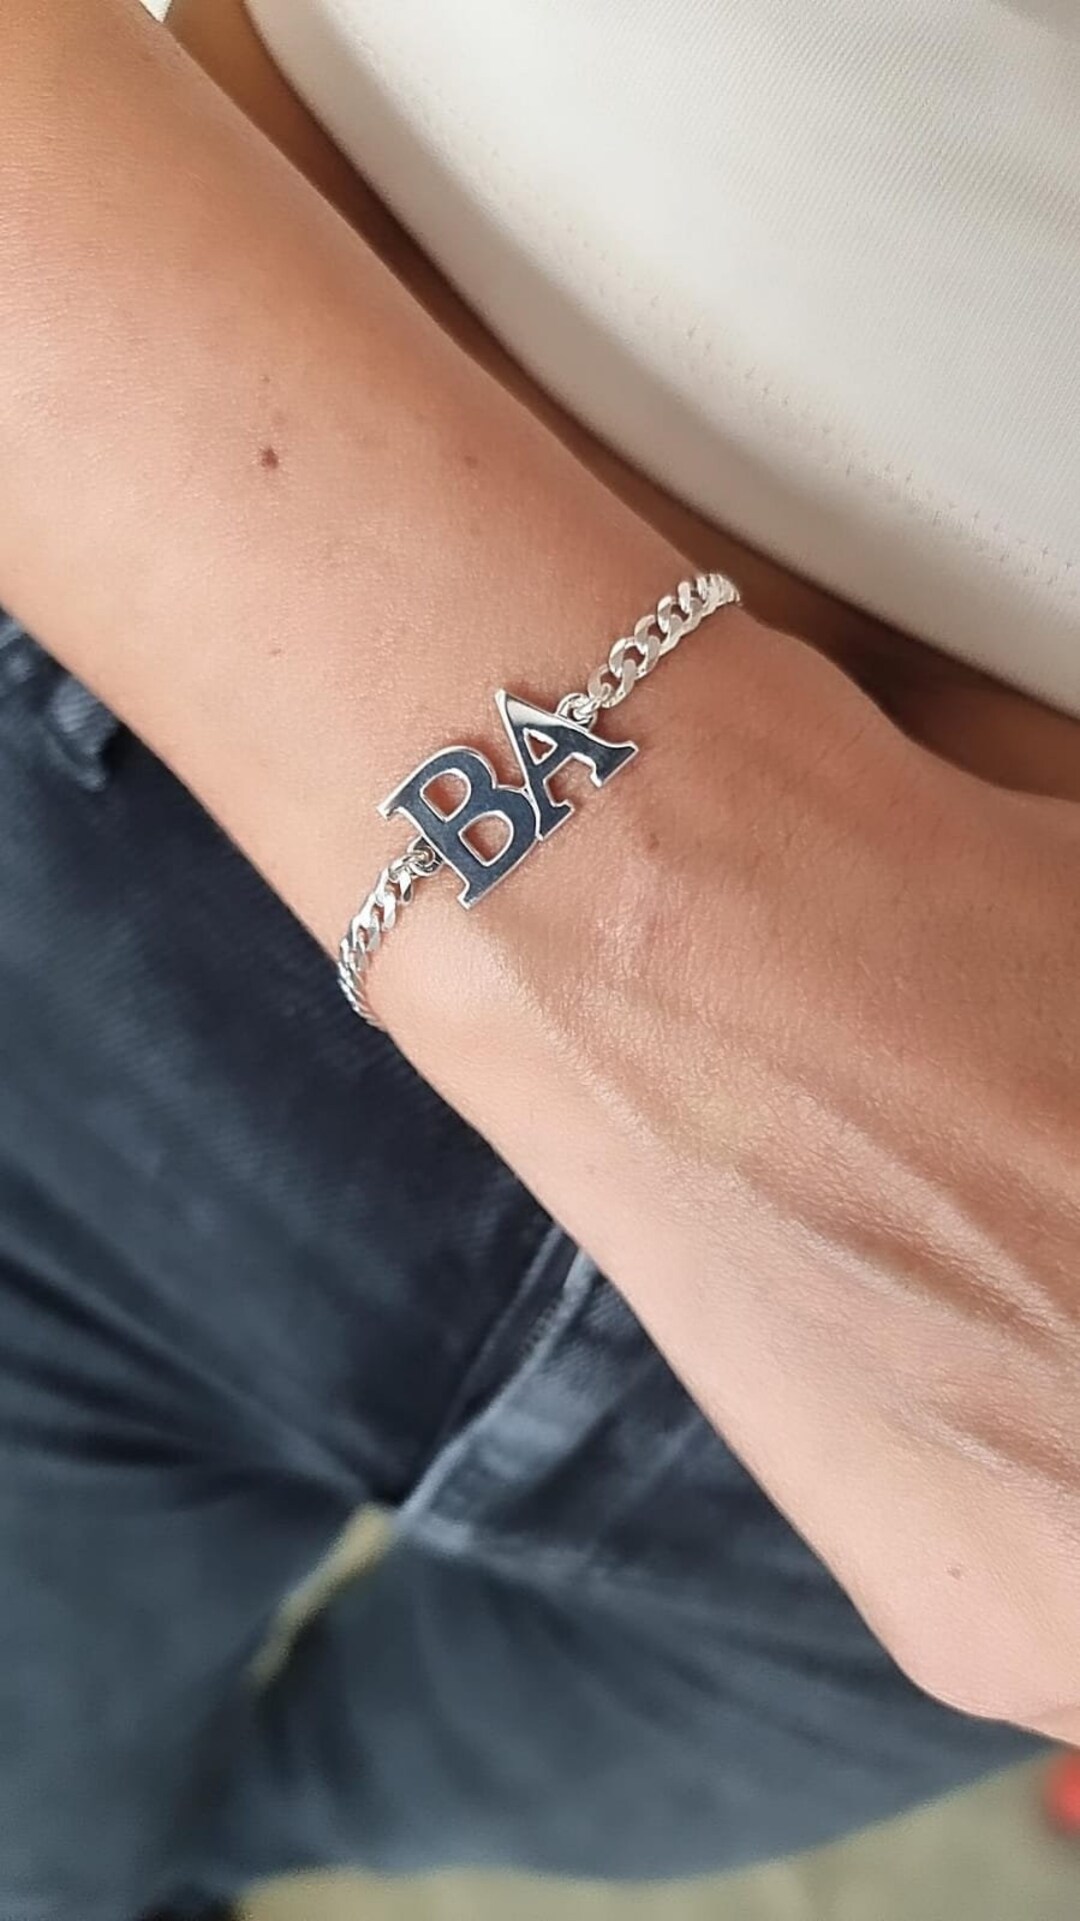 Personalized Link Bracelet with Charm of Small Letters